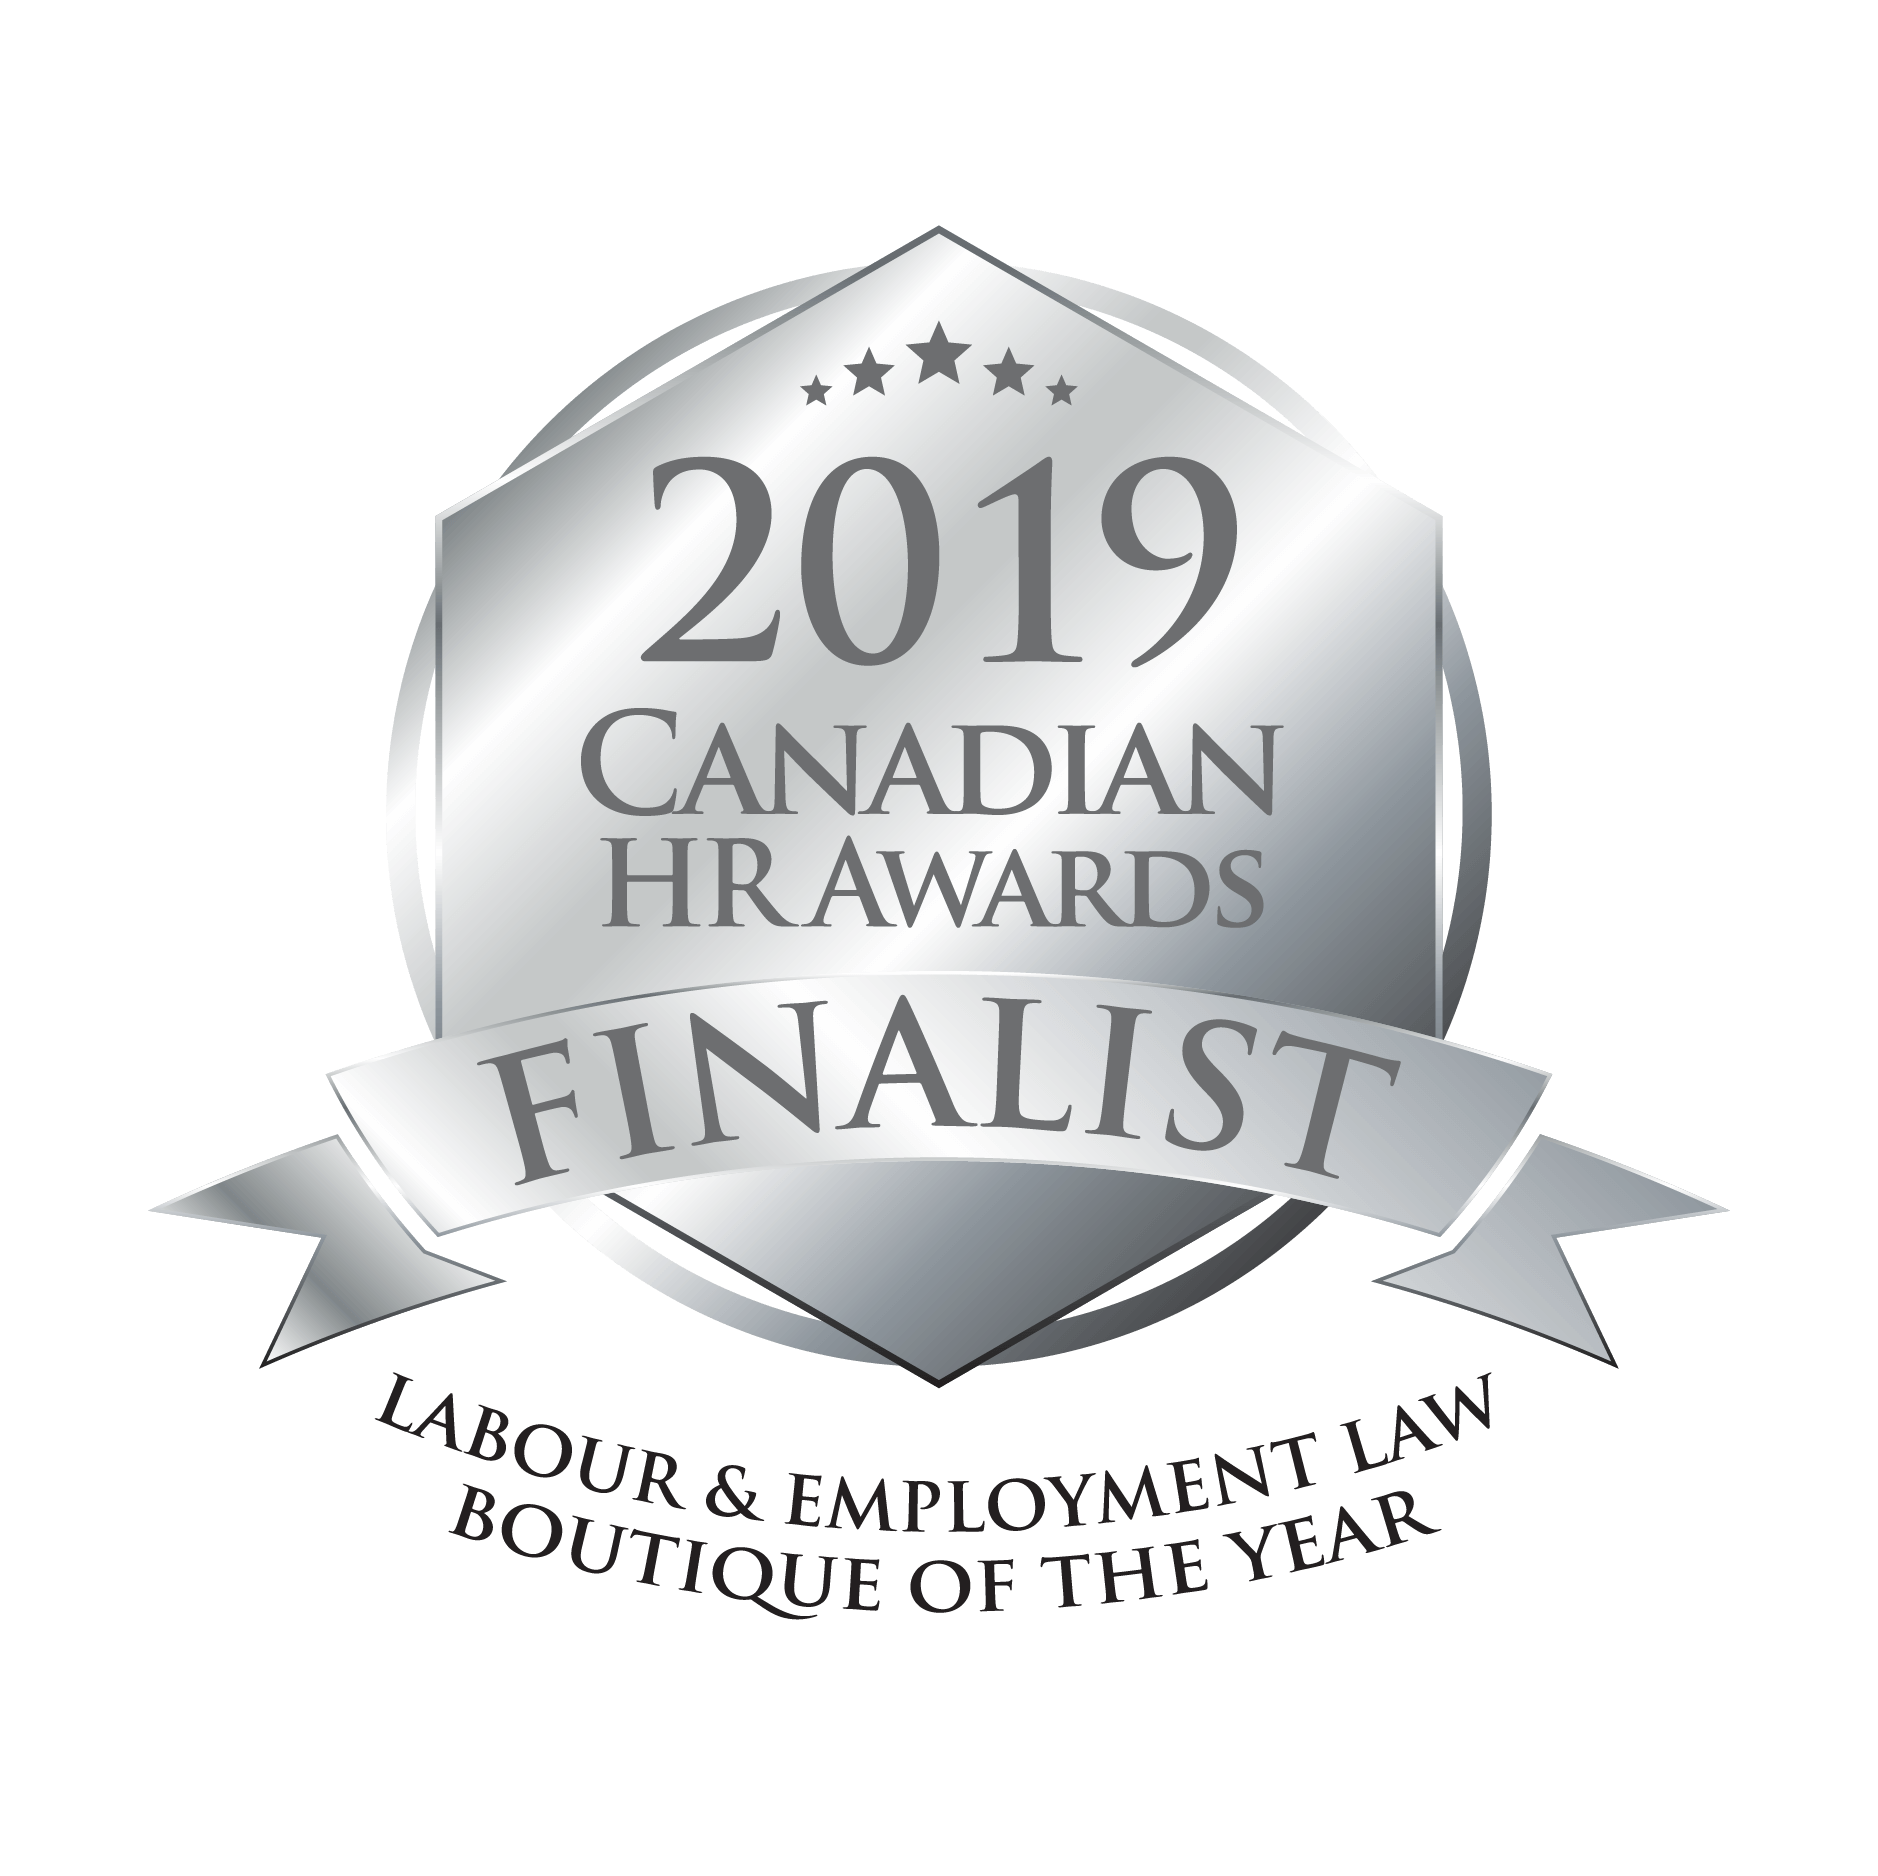 CHRA Finalist Labour & Employment Law Boutique of the Year - Sultan Lawyers